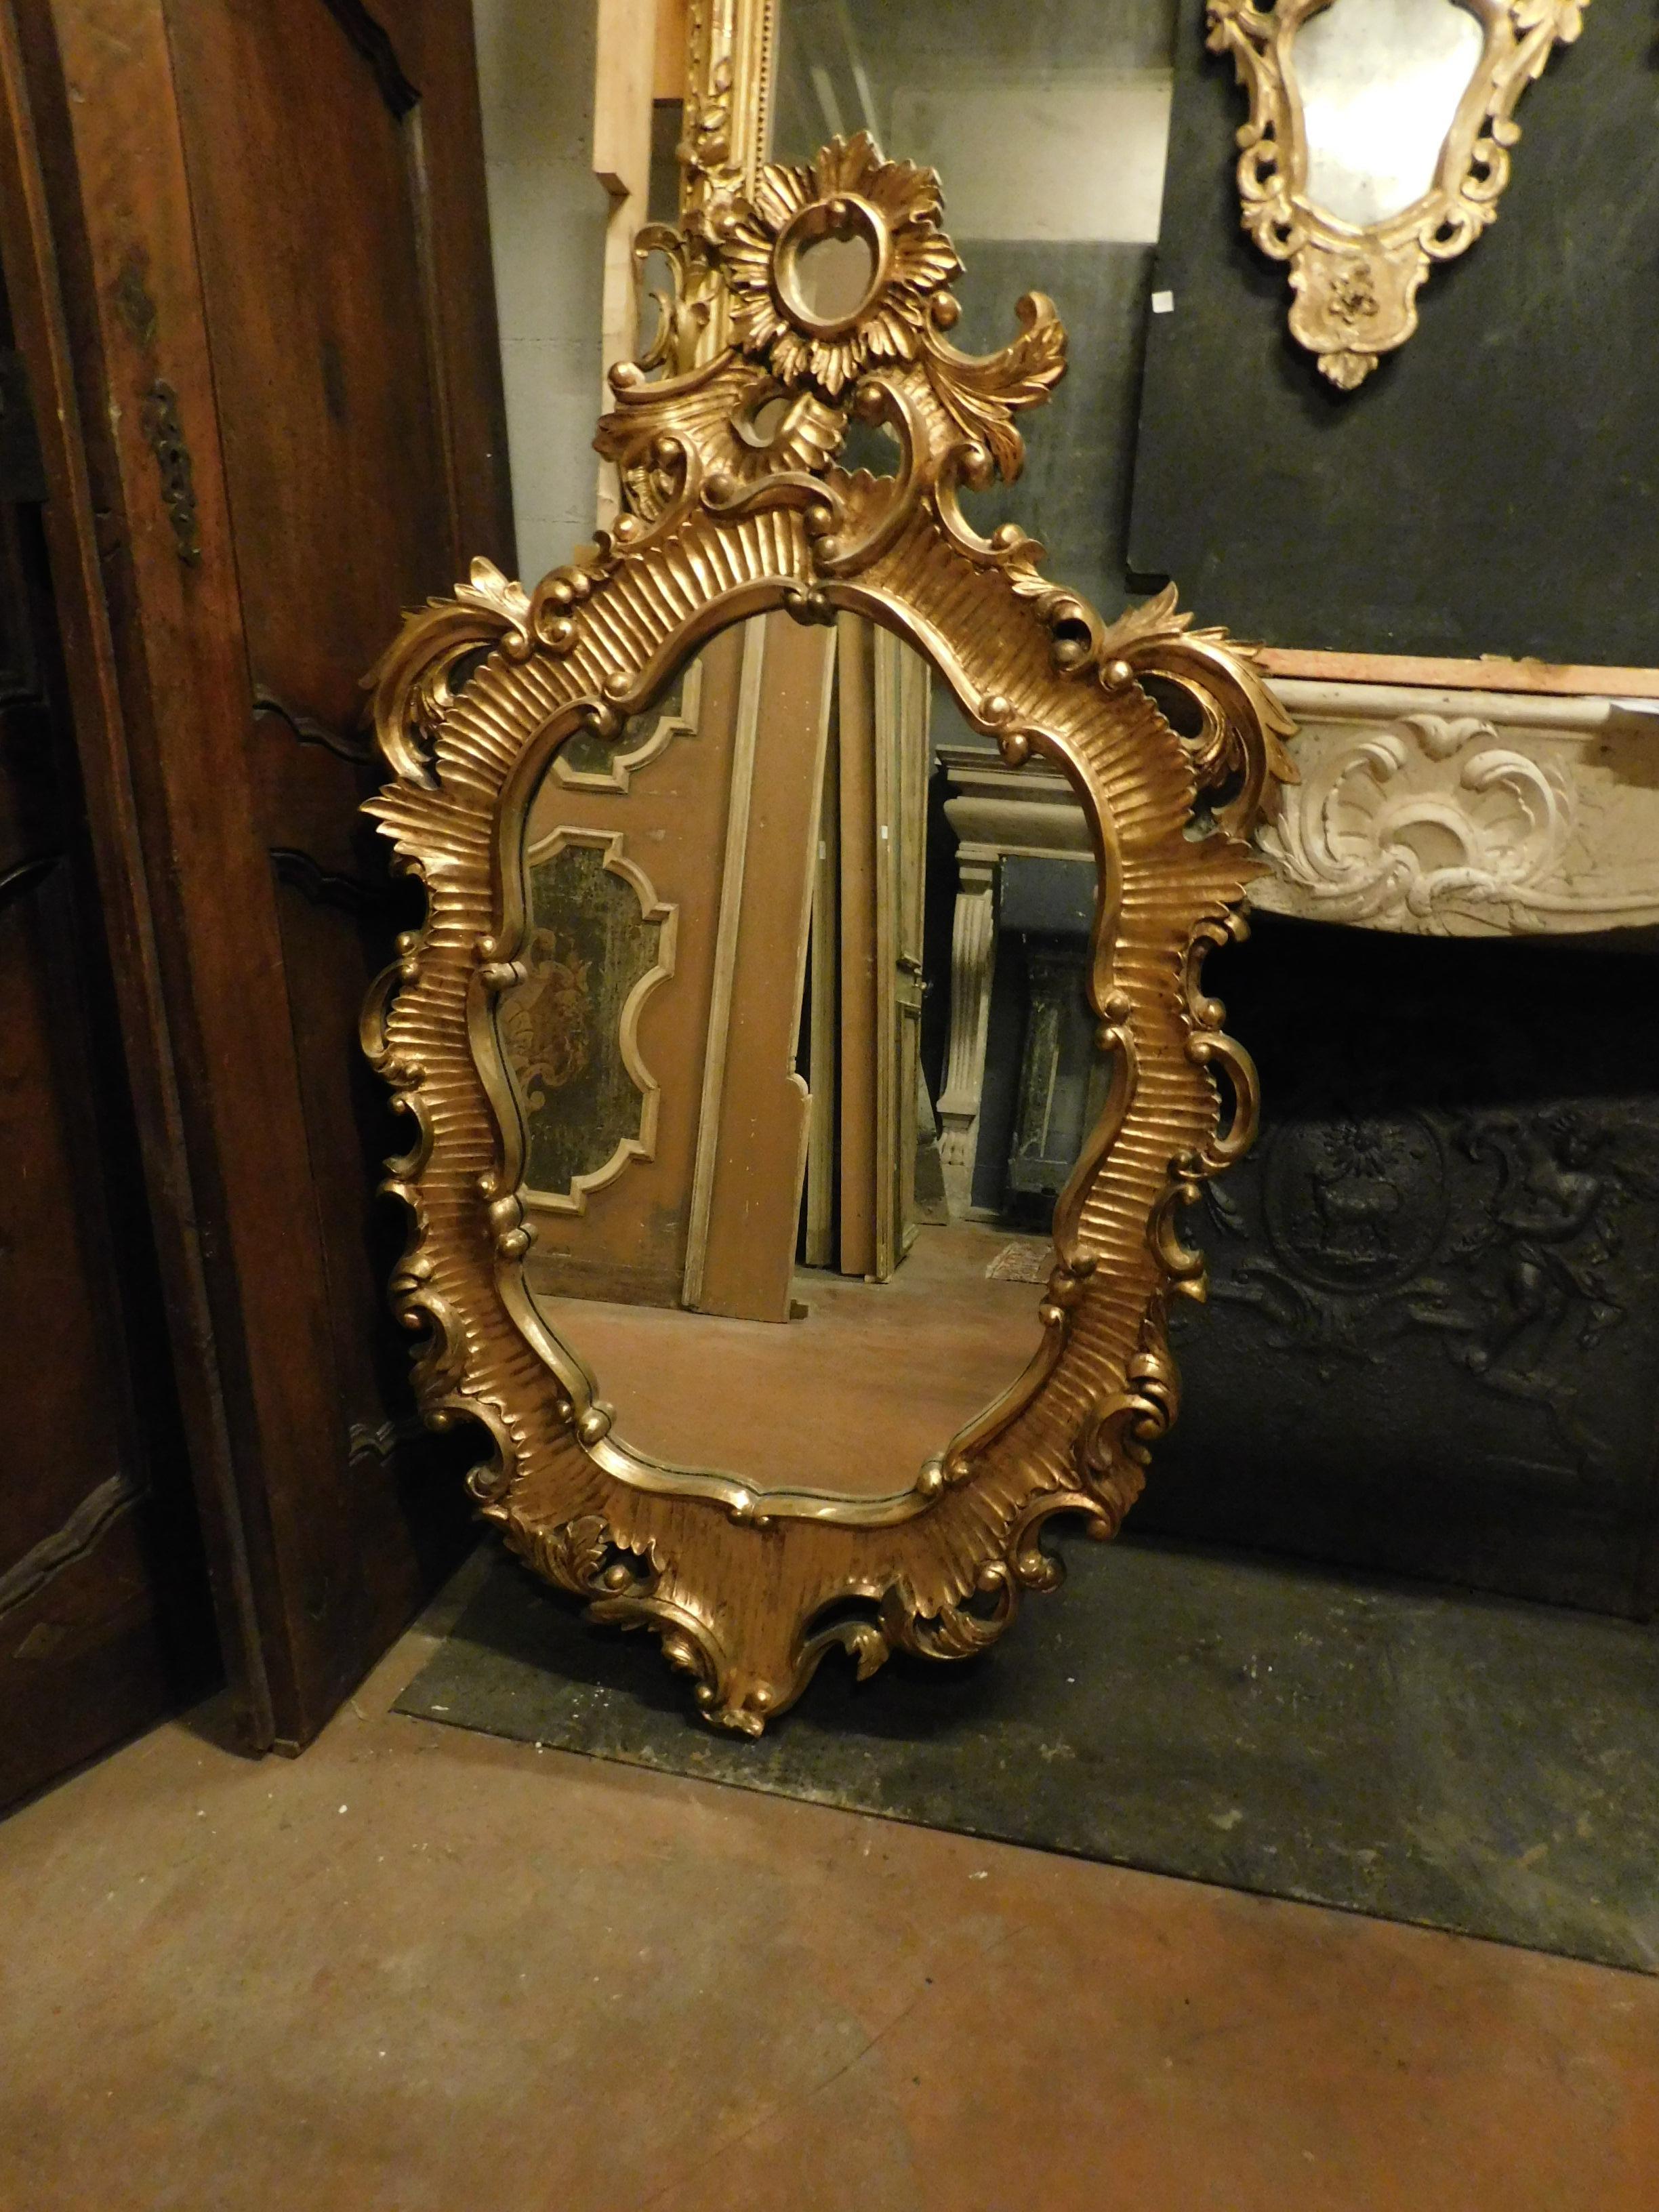 Vintage mirror in carved and gilded wood, molded frame with a shaped shape around which leaf shoots are wrapped that from the lower center move symmetrically upwards to form the large sunburst molding, particular shape, very baroque and of great